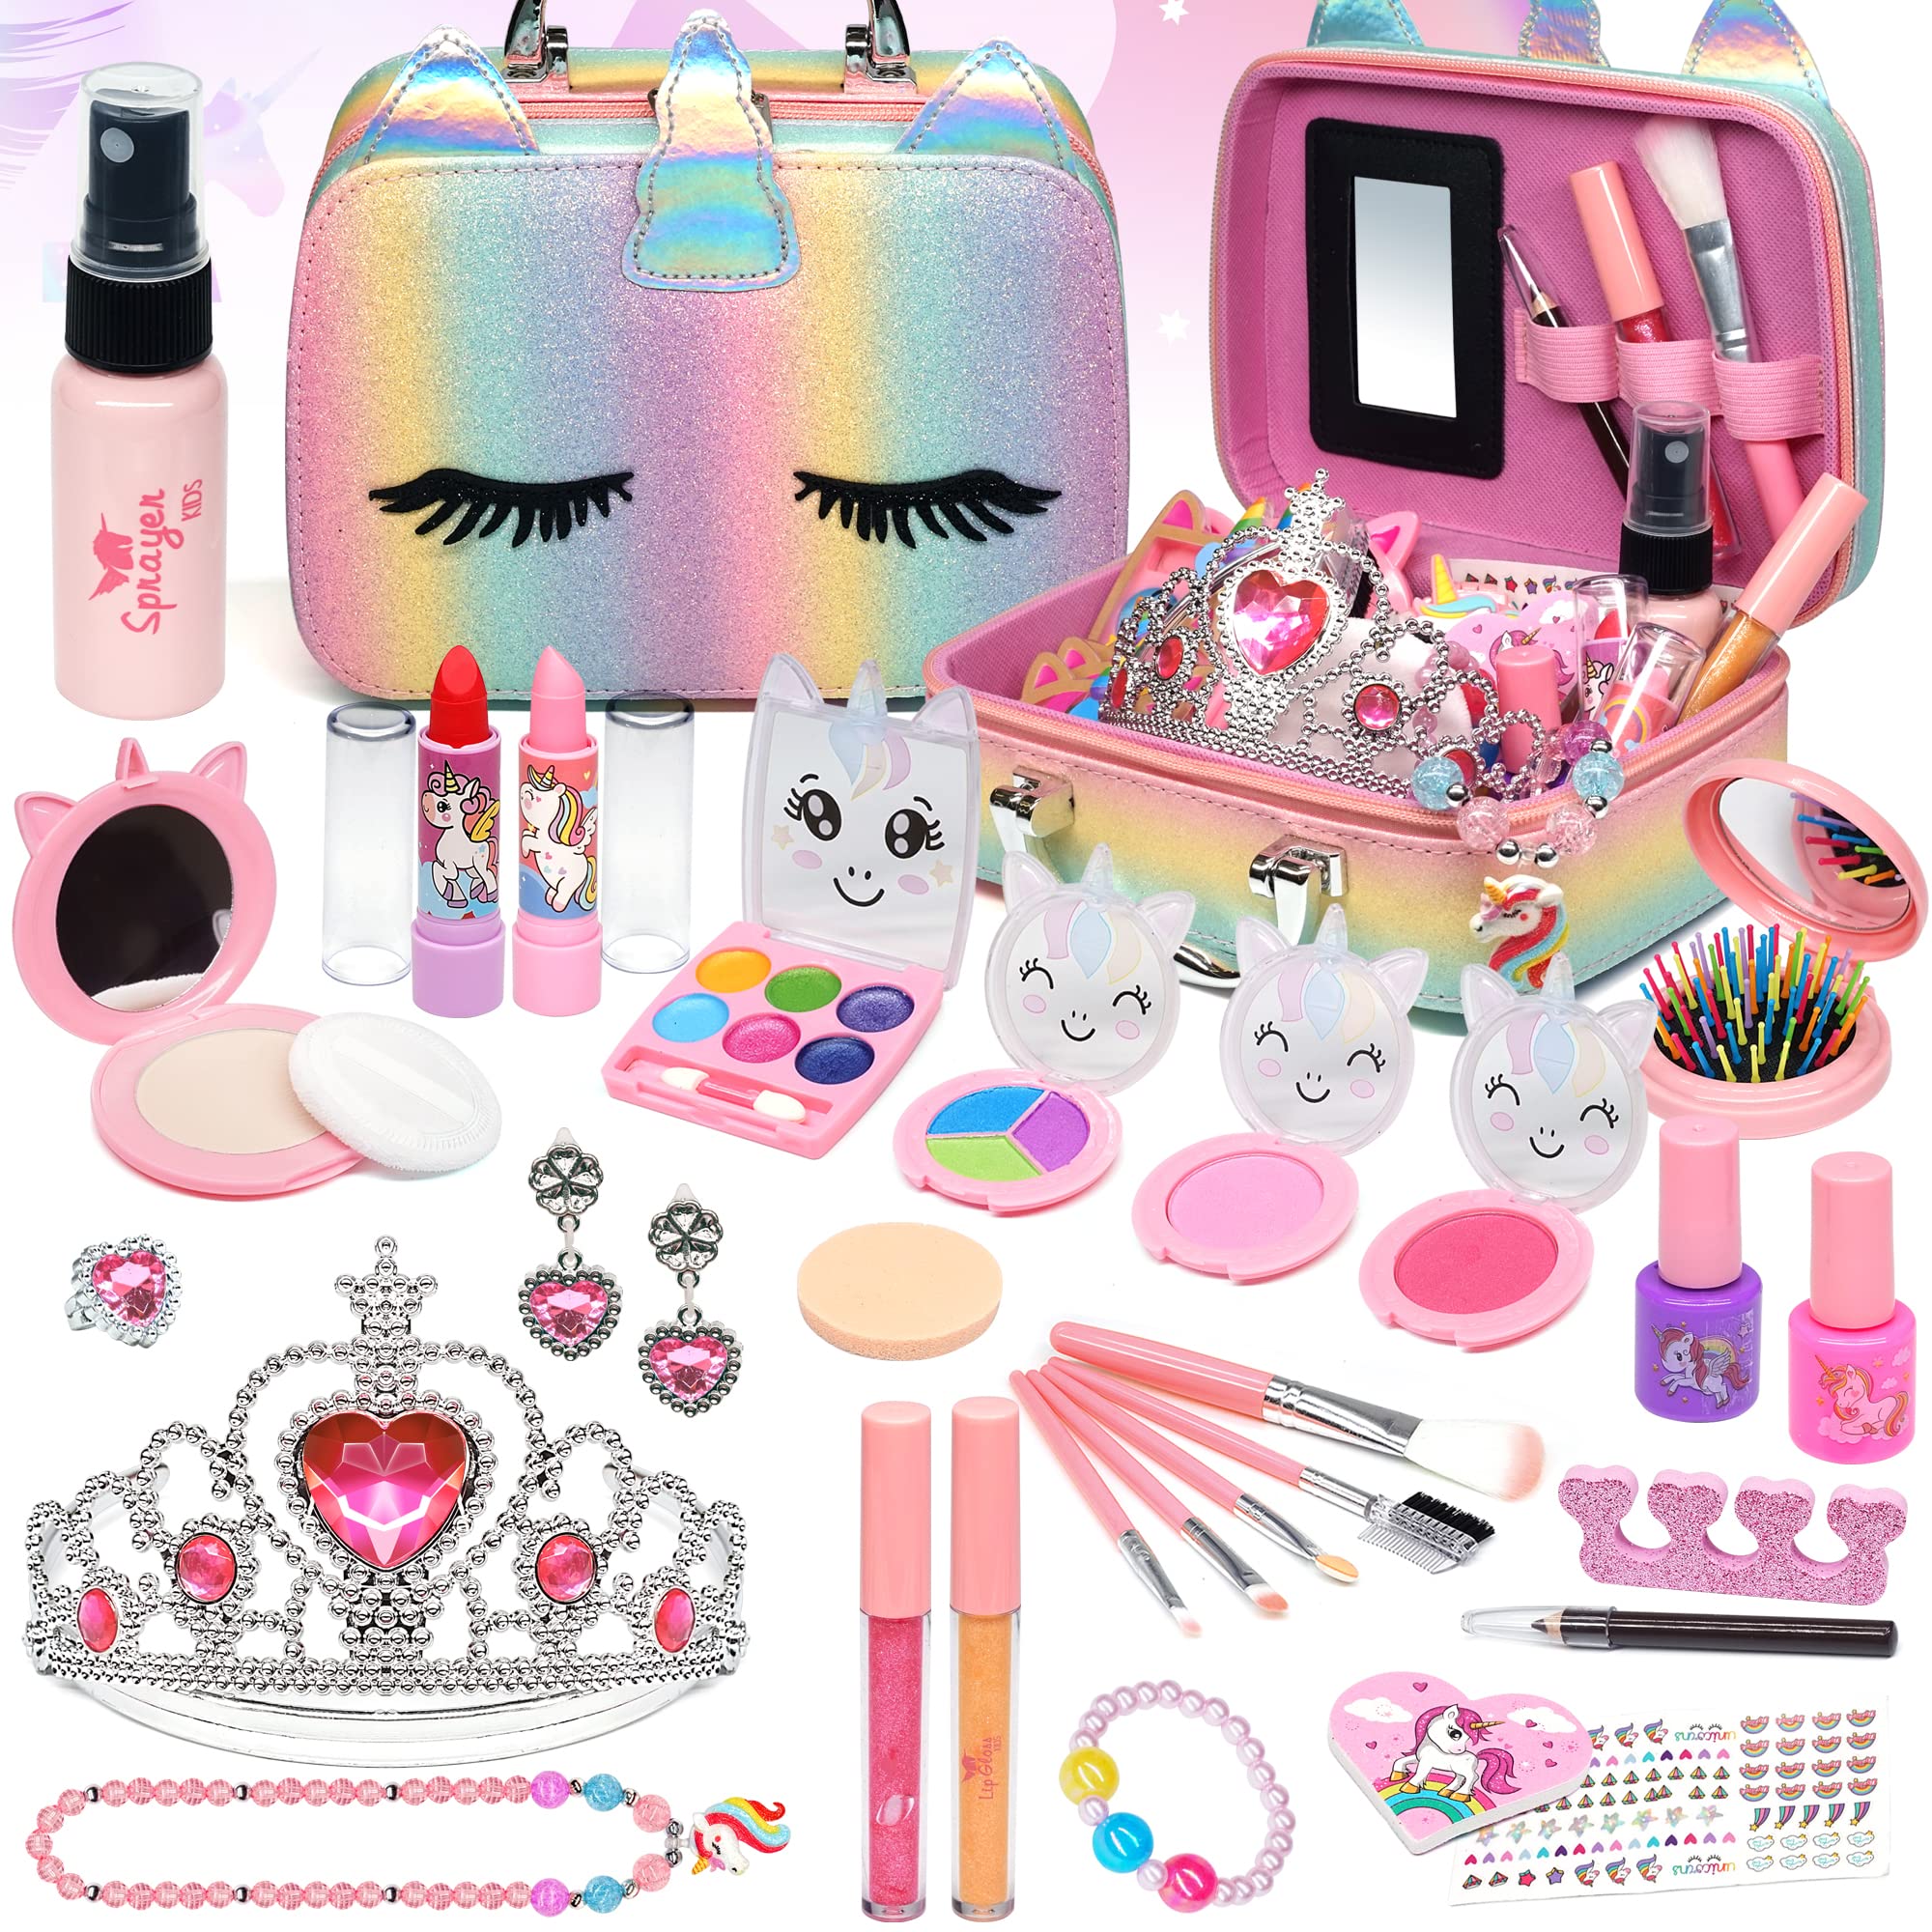 Kids Makeup Kit for Girl - Kids Makeup Kit Toys for Girls Washable Makeup Set Little Girls, Child Play Real Girl Makeup Toys,Non Toxic Cosmetic,Age3-12 Year Old Children Gift